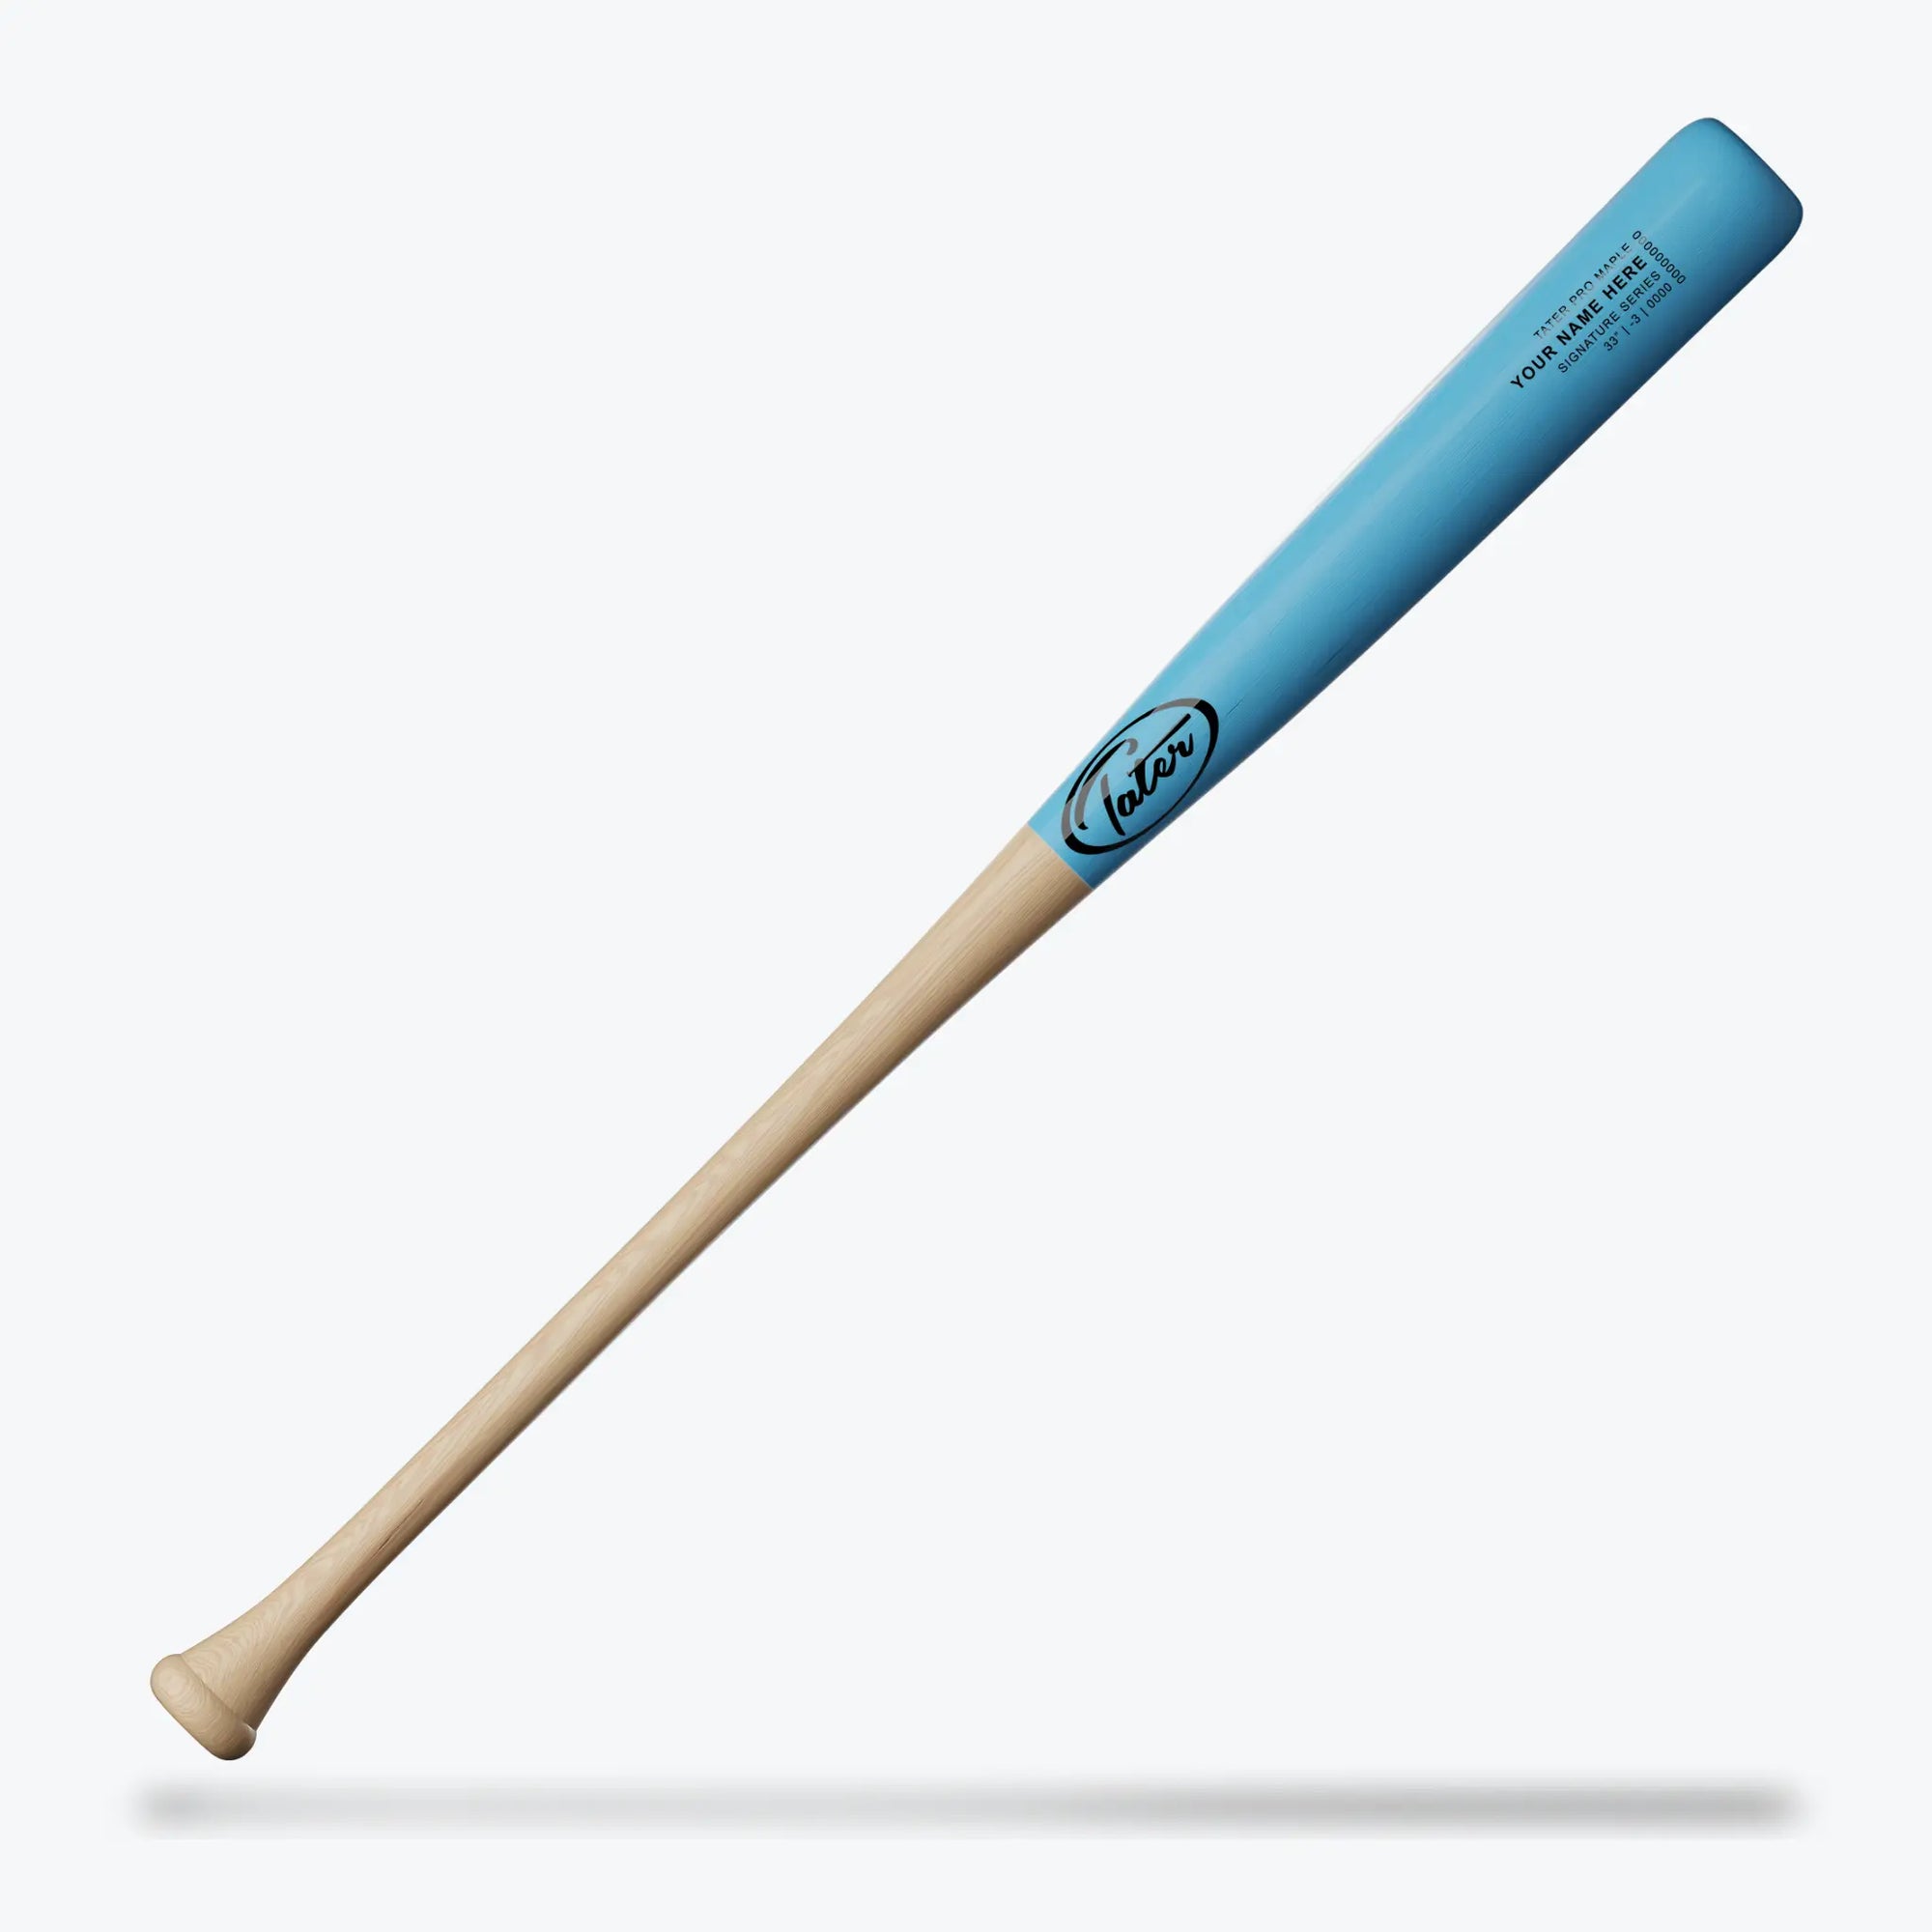 The Tater ZX maple wood bat shown here catches the eye with its baby blue barrel, fading into a natural wood handle. It's slightly end-loaded, offering a little extra weight at the bat's end for more power. The bat is tailored for those who prefer a unique touch to their gear without compromising on quality swings.